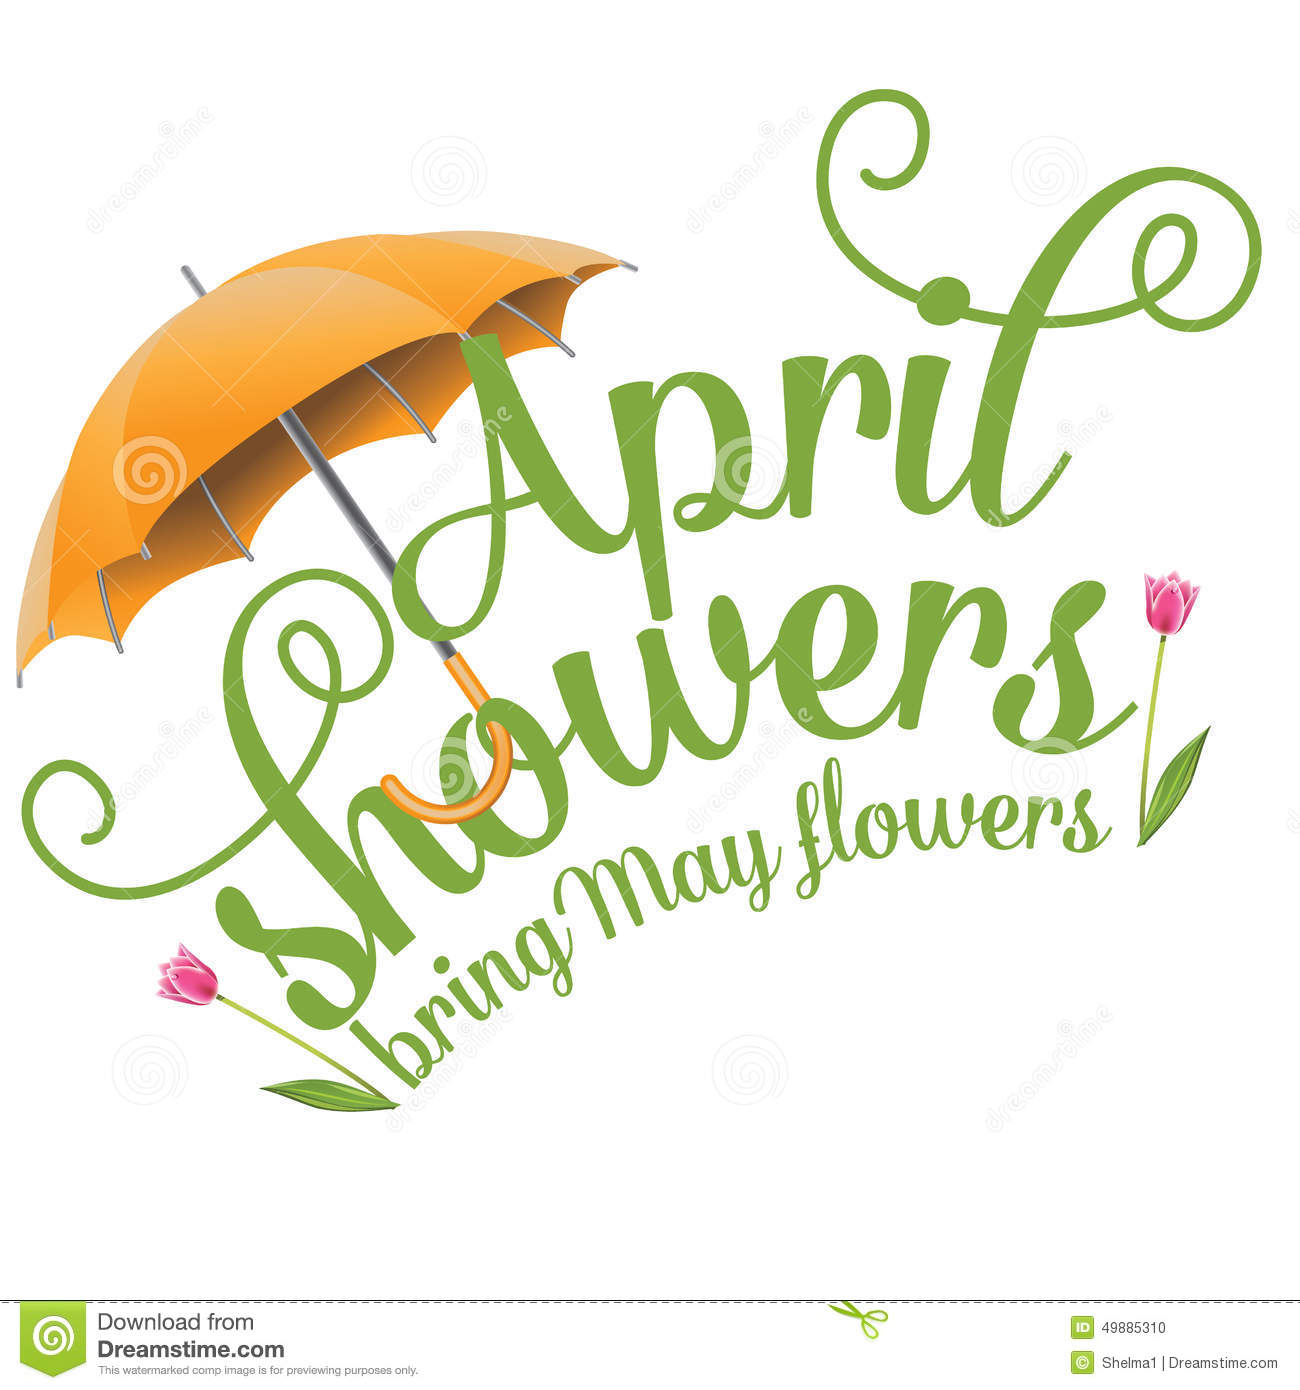 April Showers Bring May Flowers Clip Art